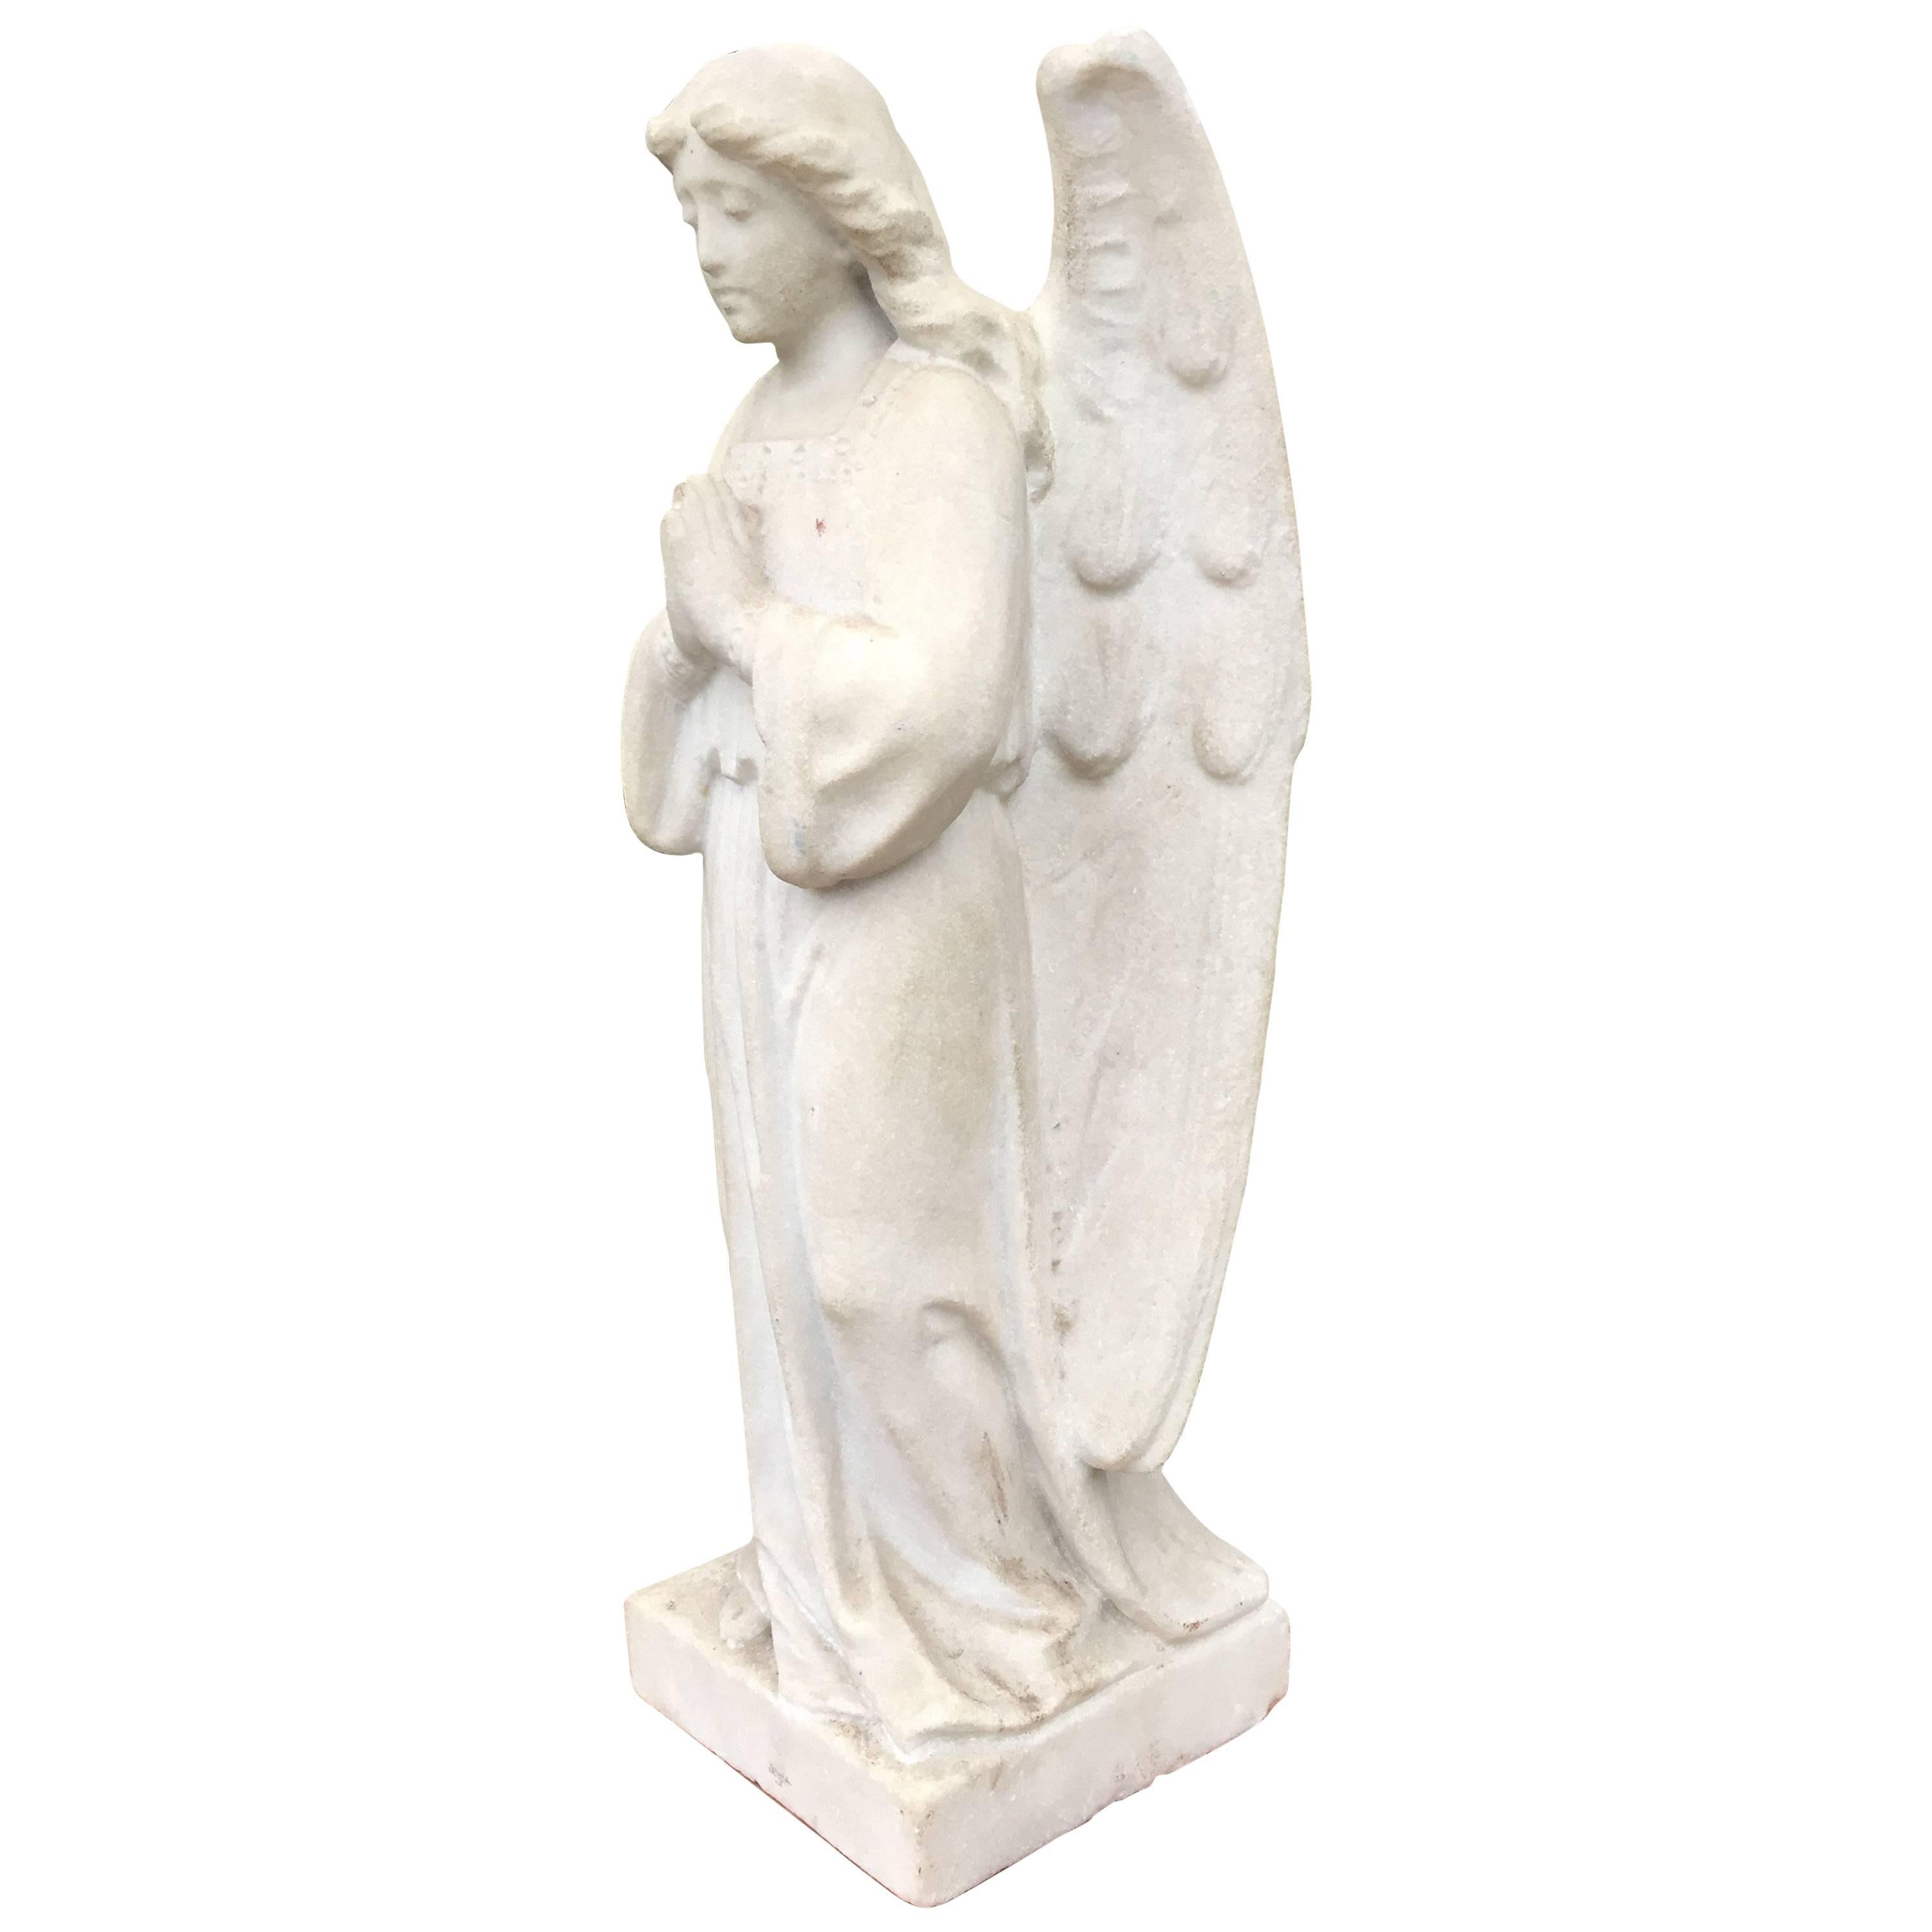 Early 1900 Hand-Carved Marble Angel Figure Statue with Wings Beautiful Sculpture